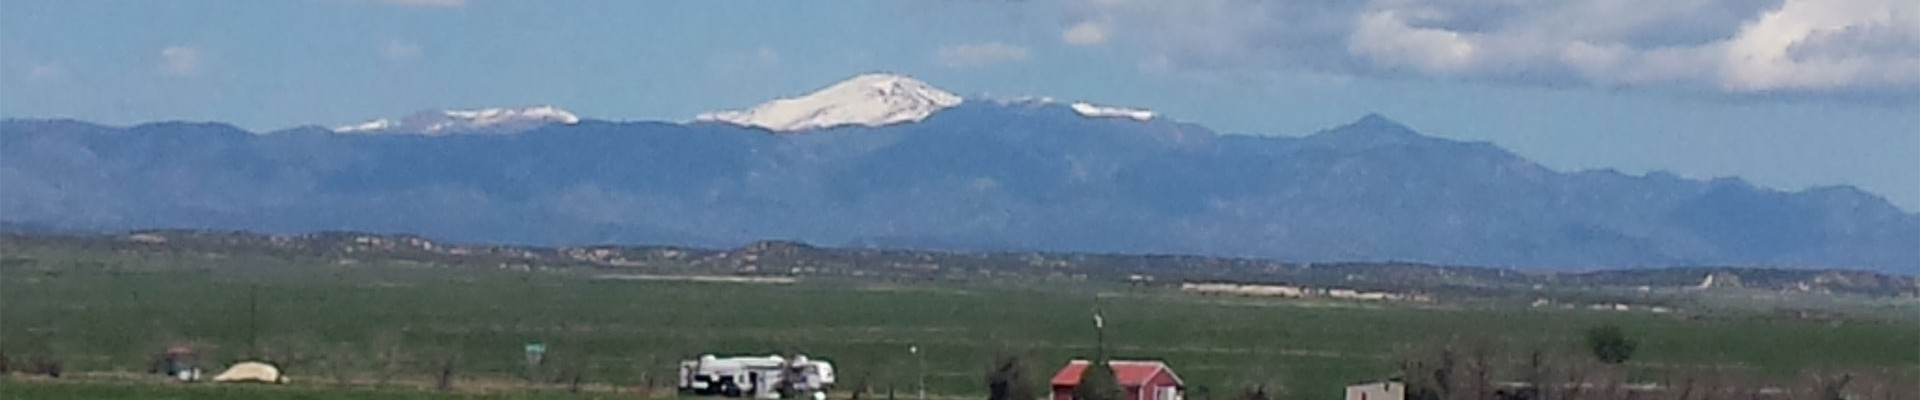 A View of Pikes Peak from Pueblo West